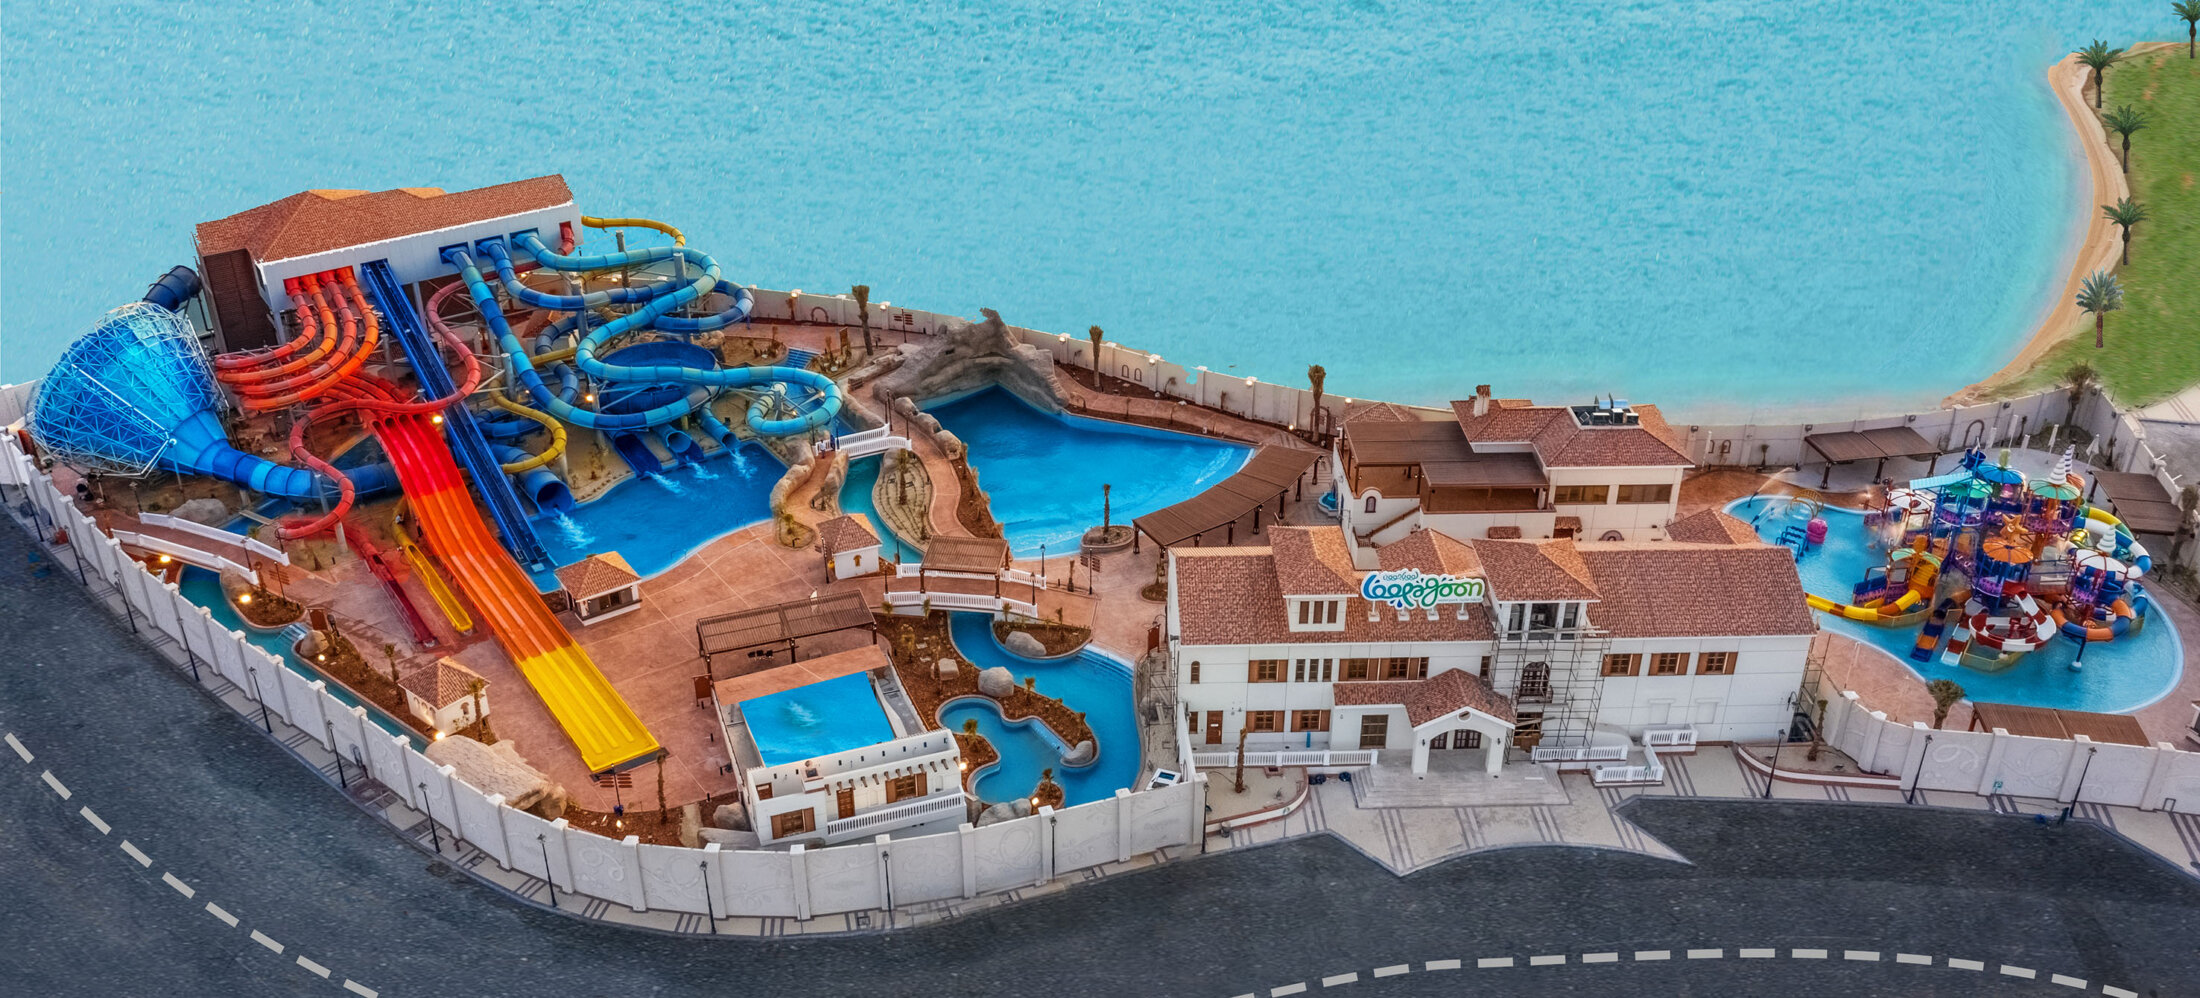 Aerial image of water park